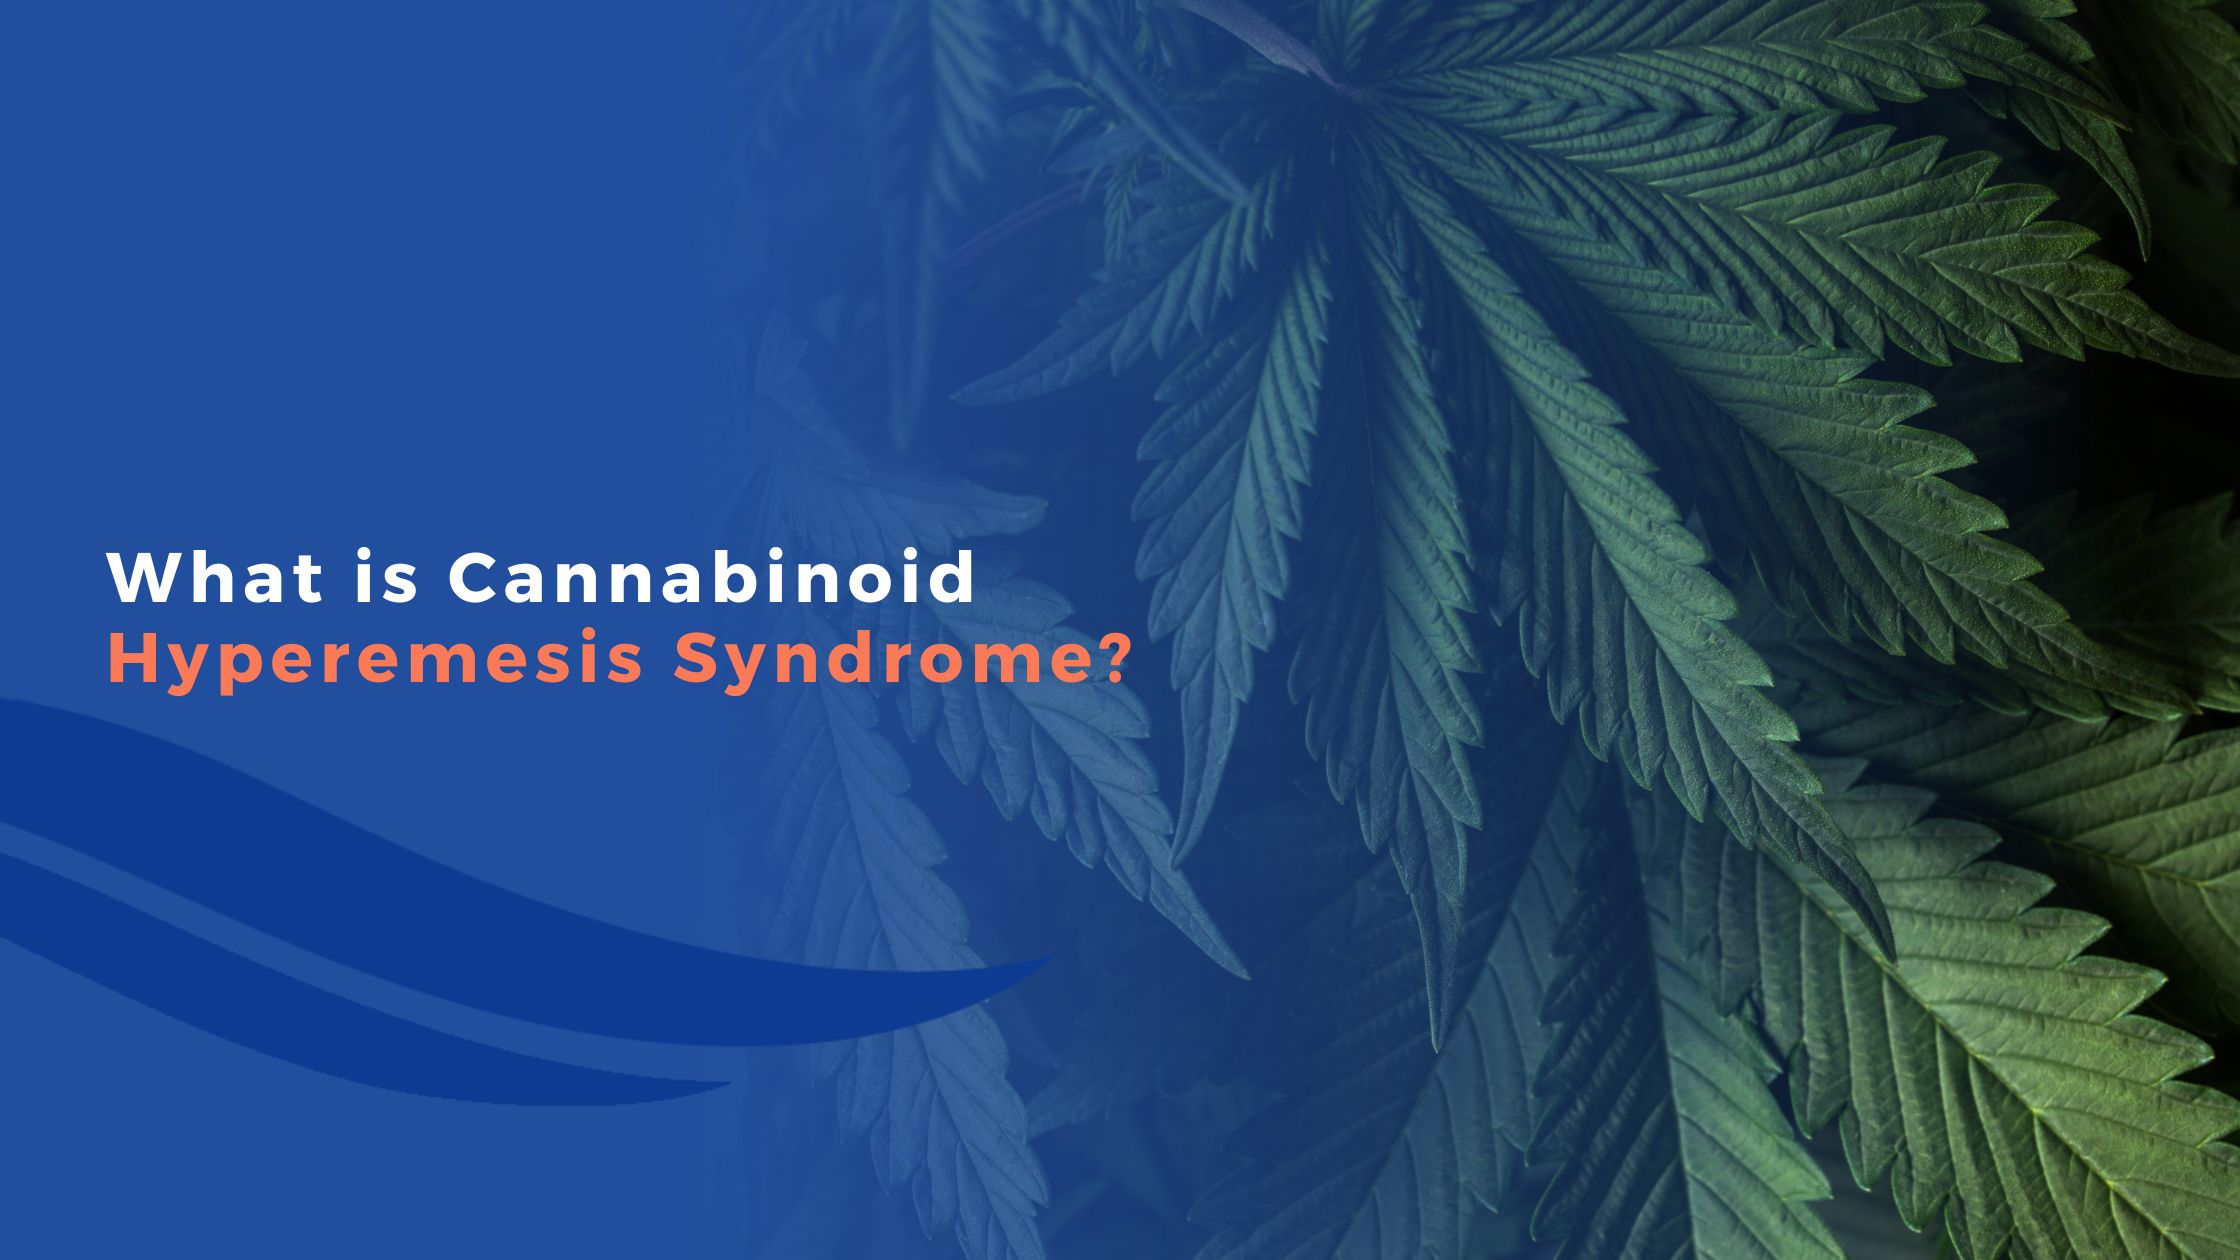 What is Cannabinoid Hyperemesis Syndrome?